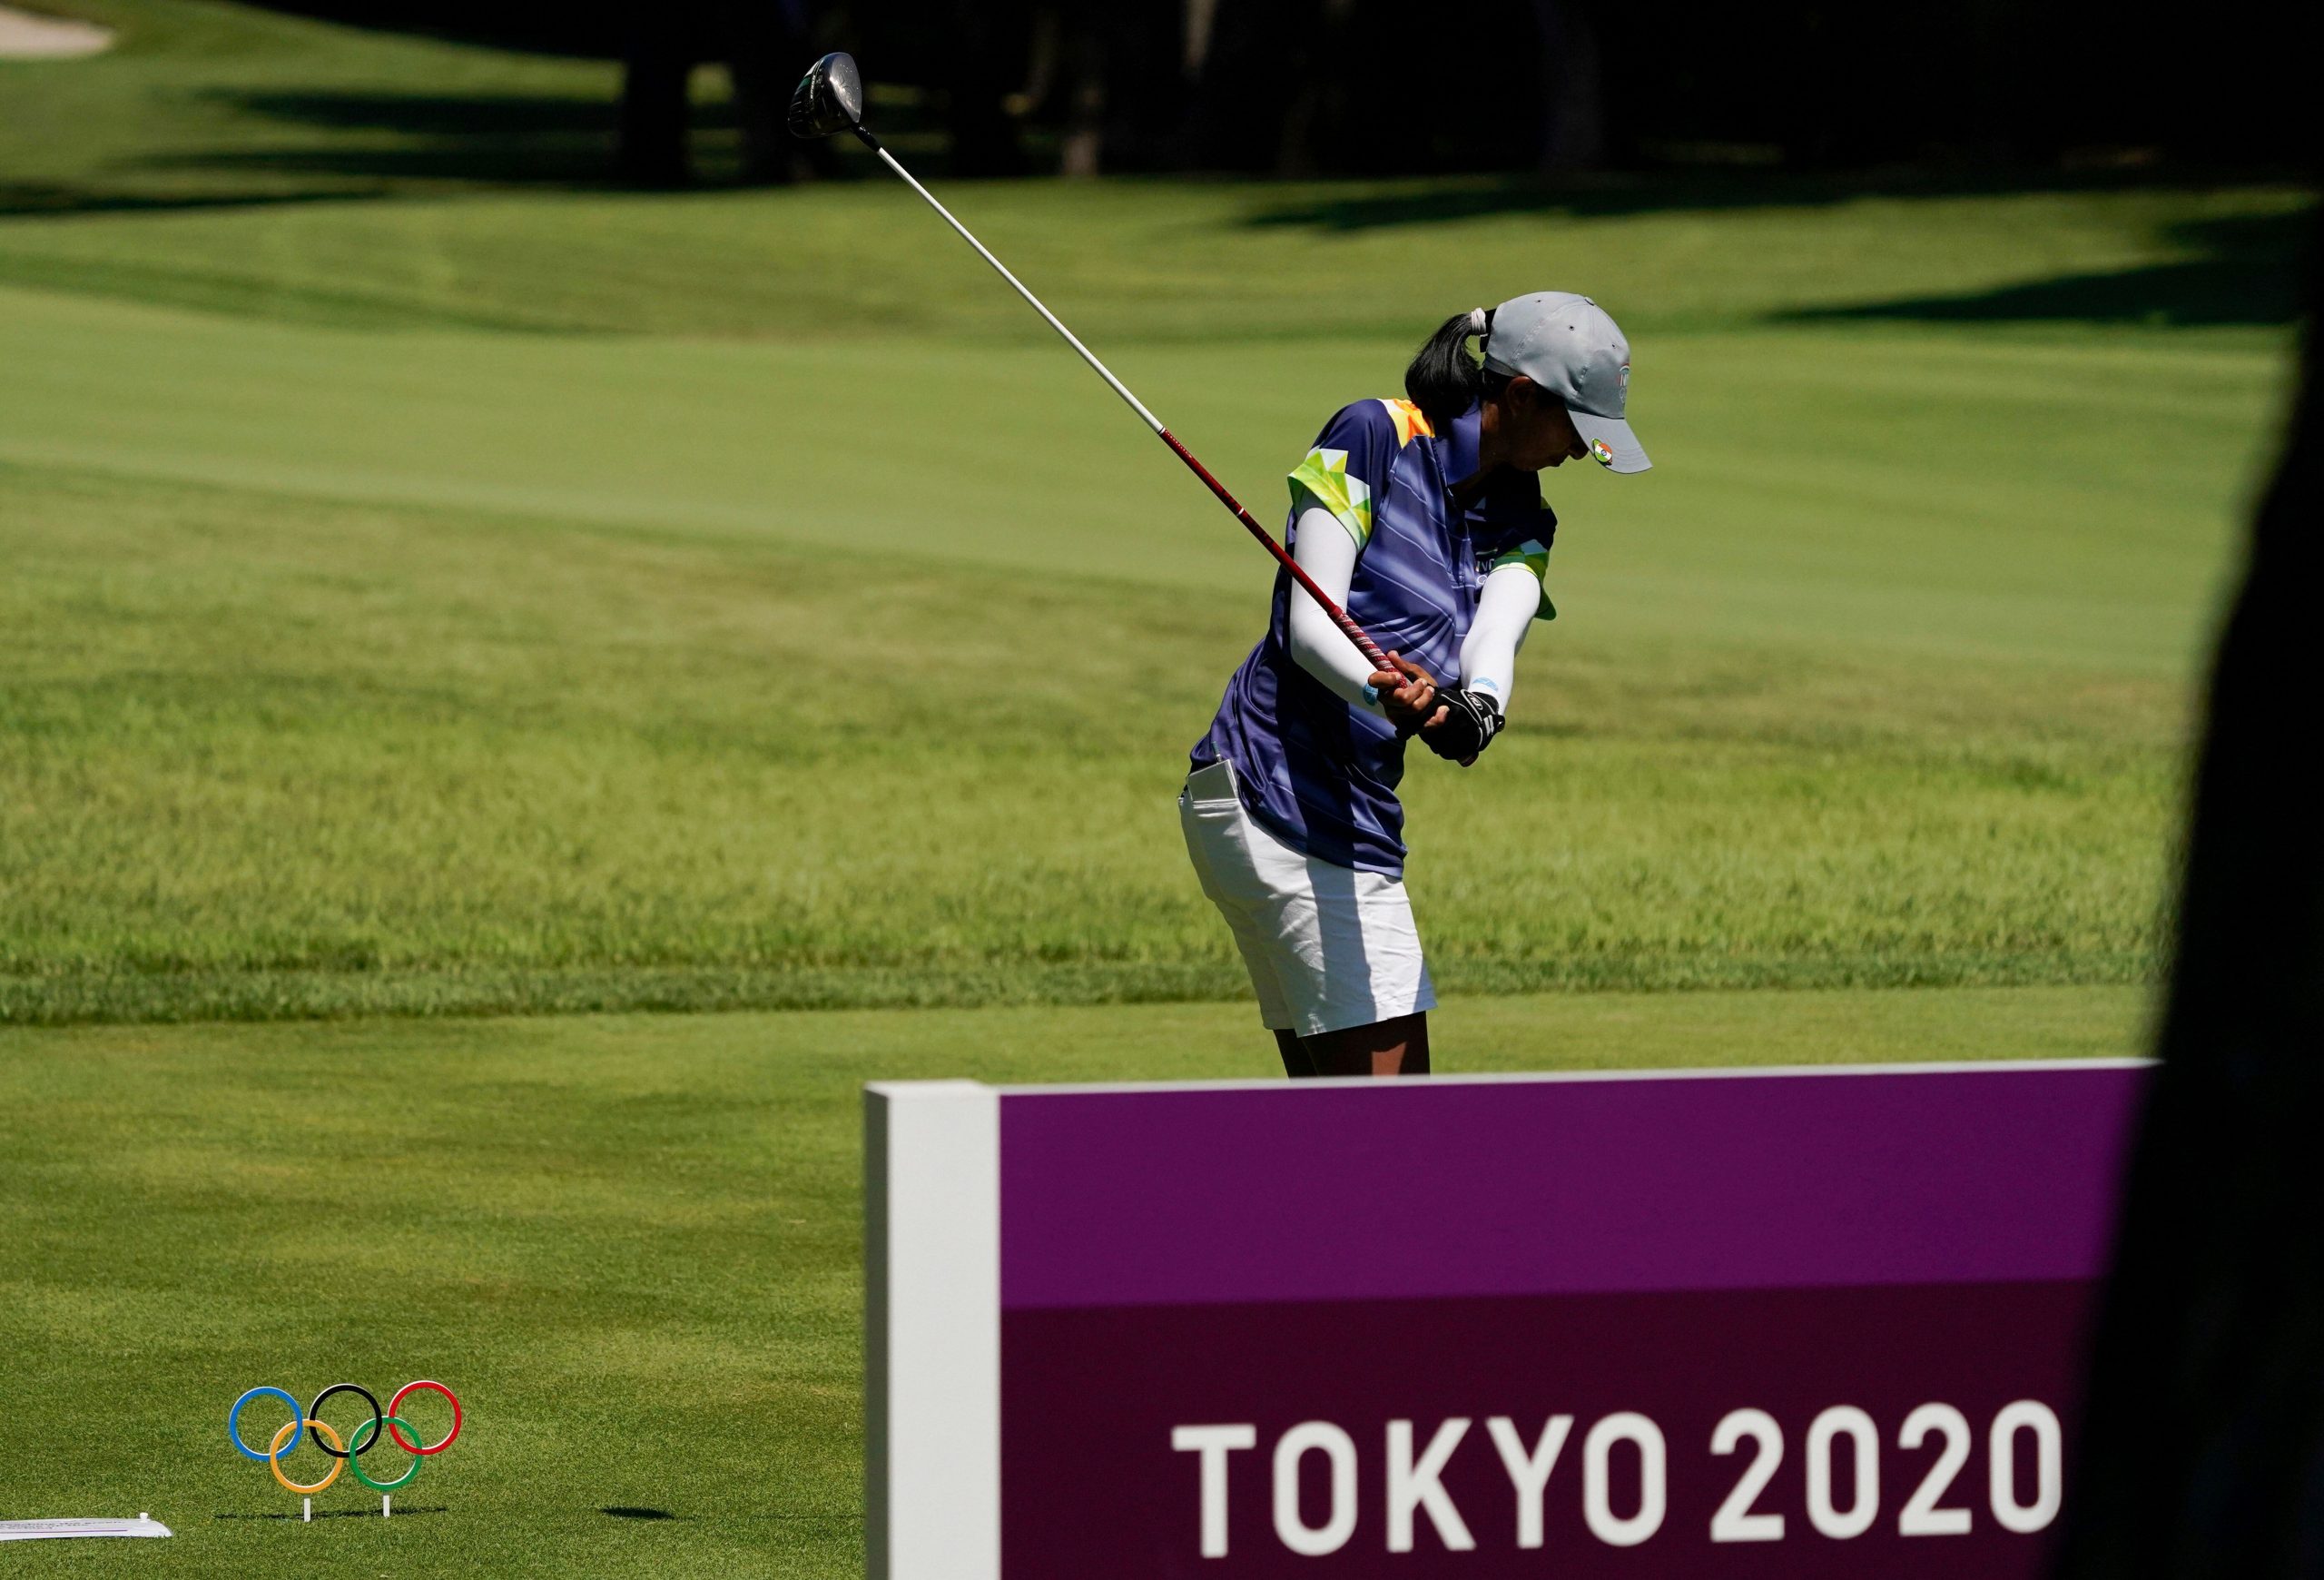 Tokyo Olympics: Indian golfer Aditi Ashok finishes 4th, misses bronze by a stroke